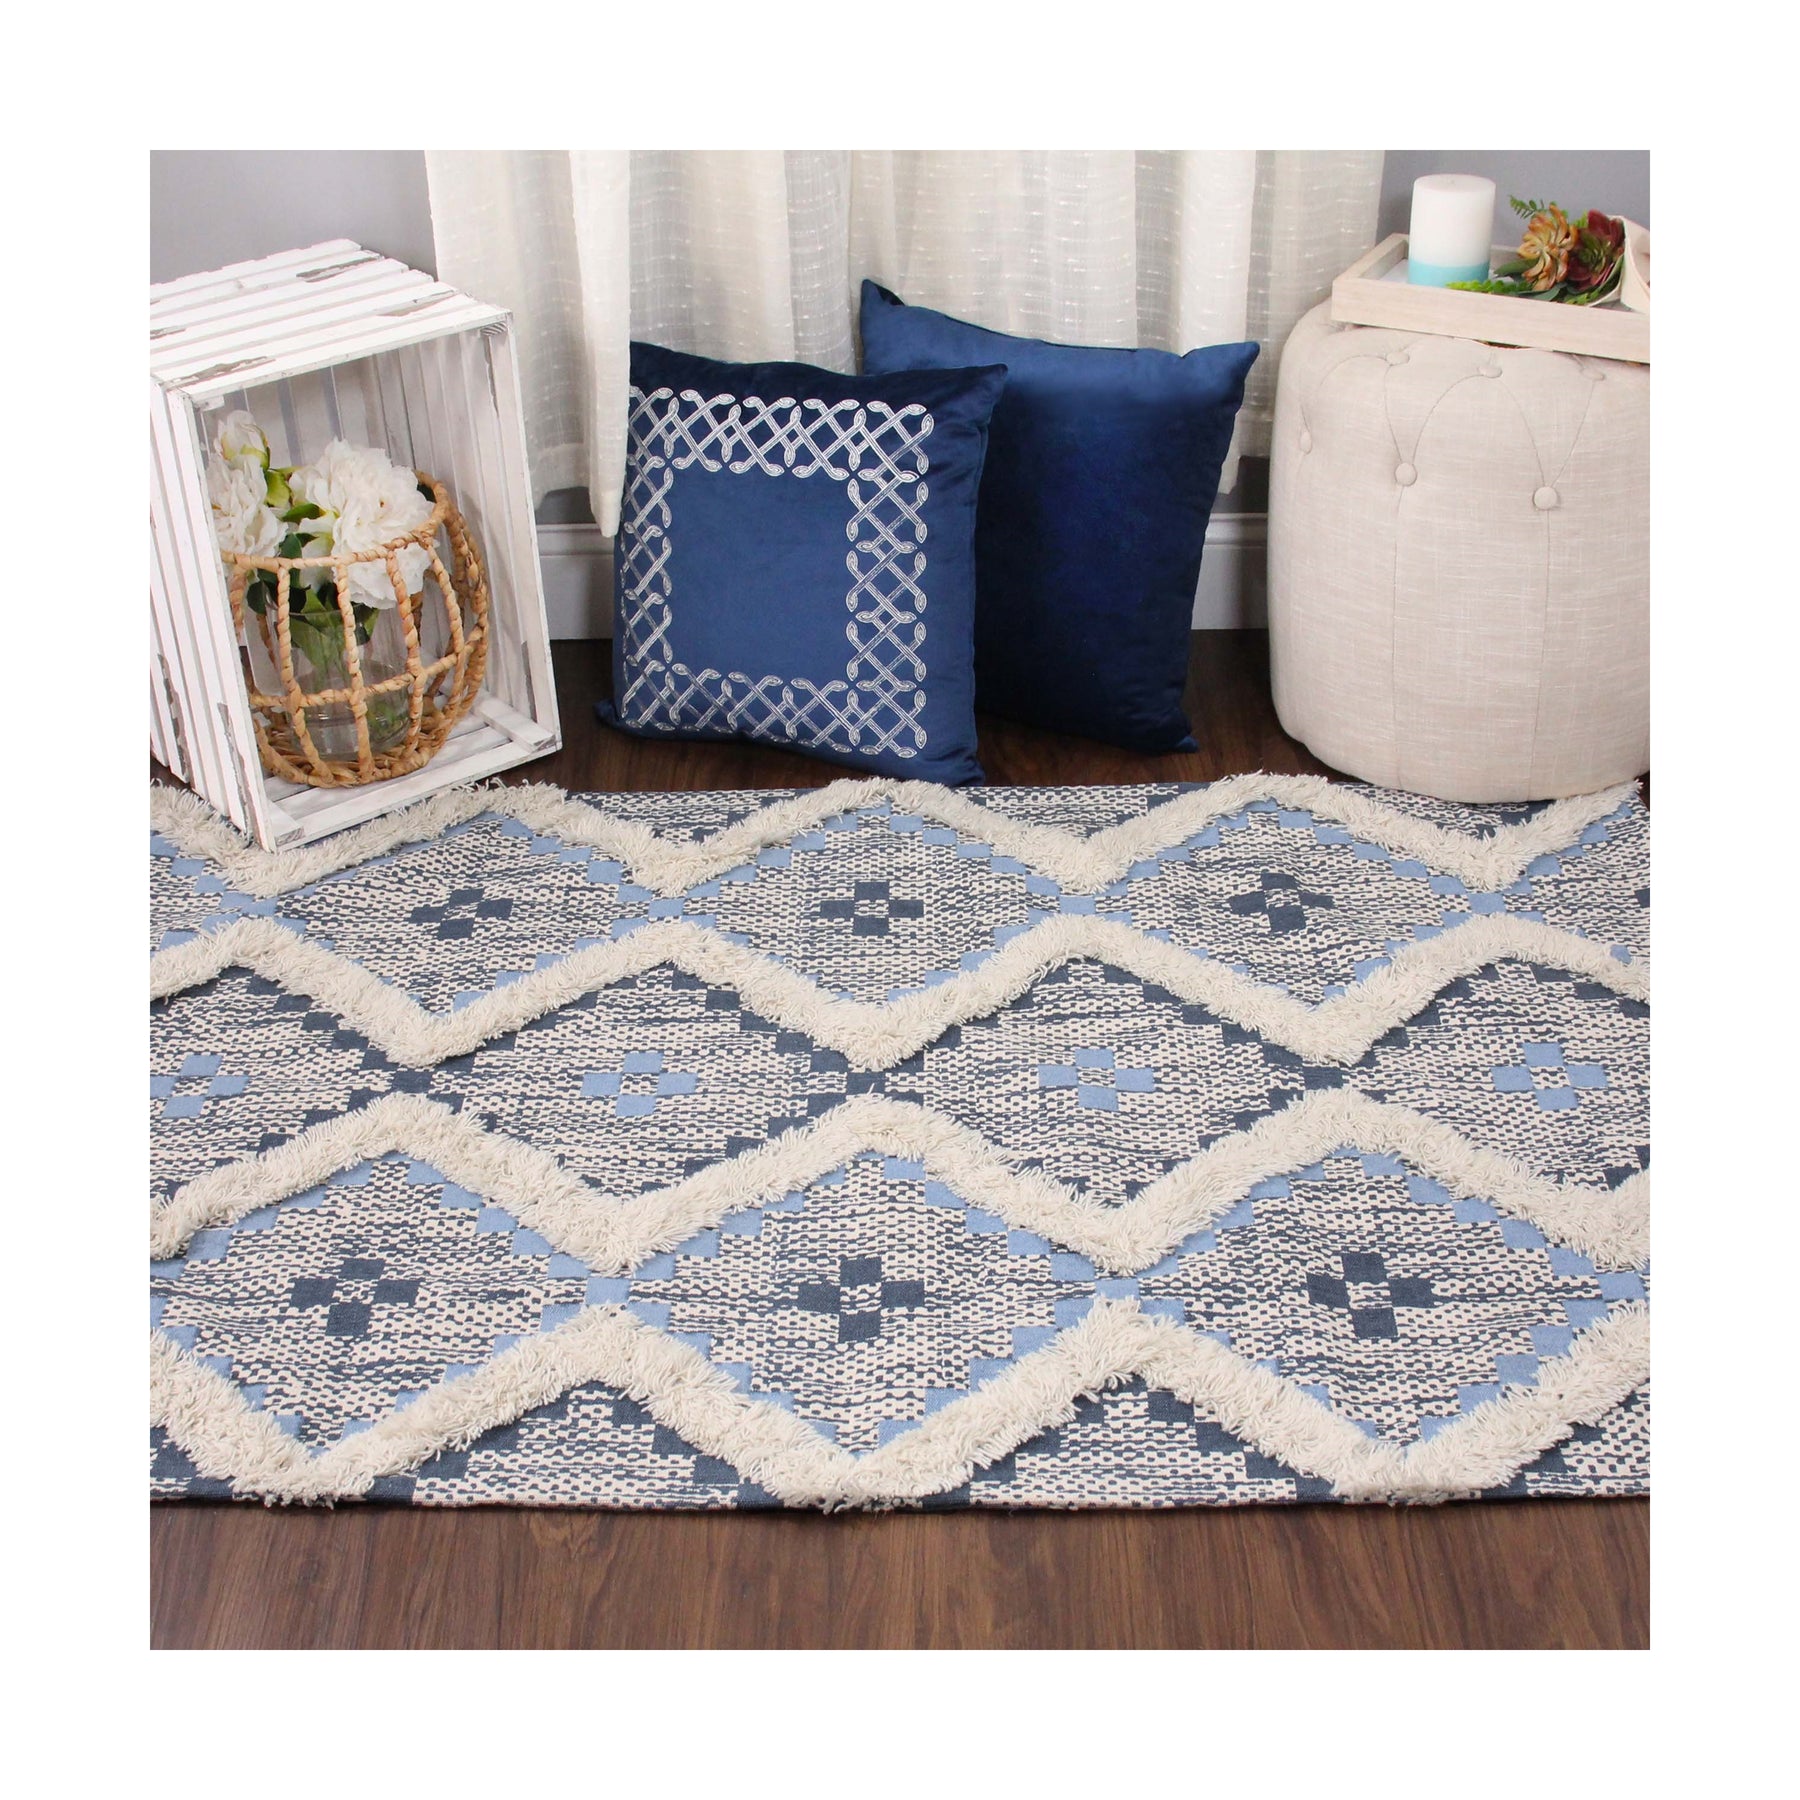 Superior Indoor Area Rug Collection Geometric Design with Cotton-Latex Backing - Stone Blue-Midnight Blue